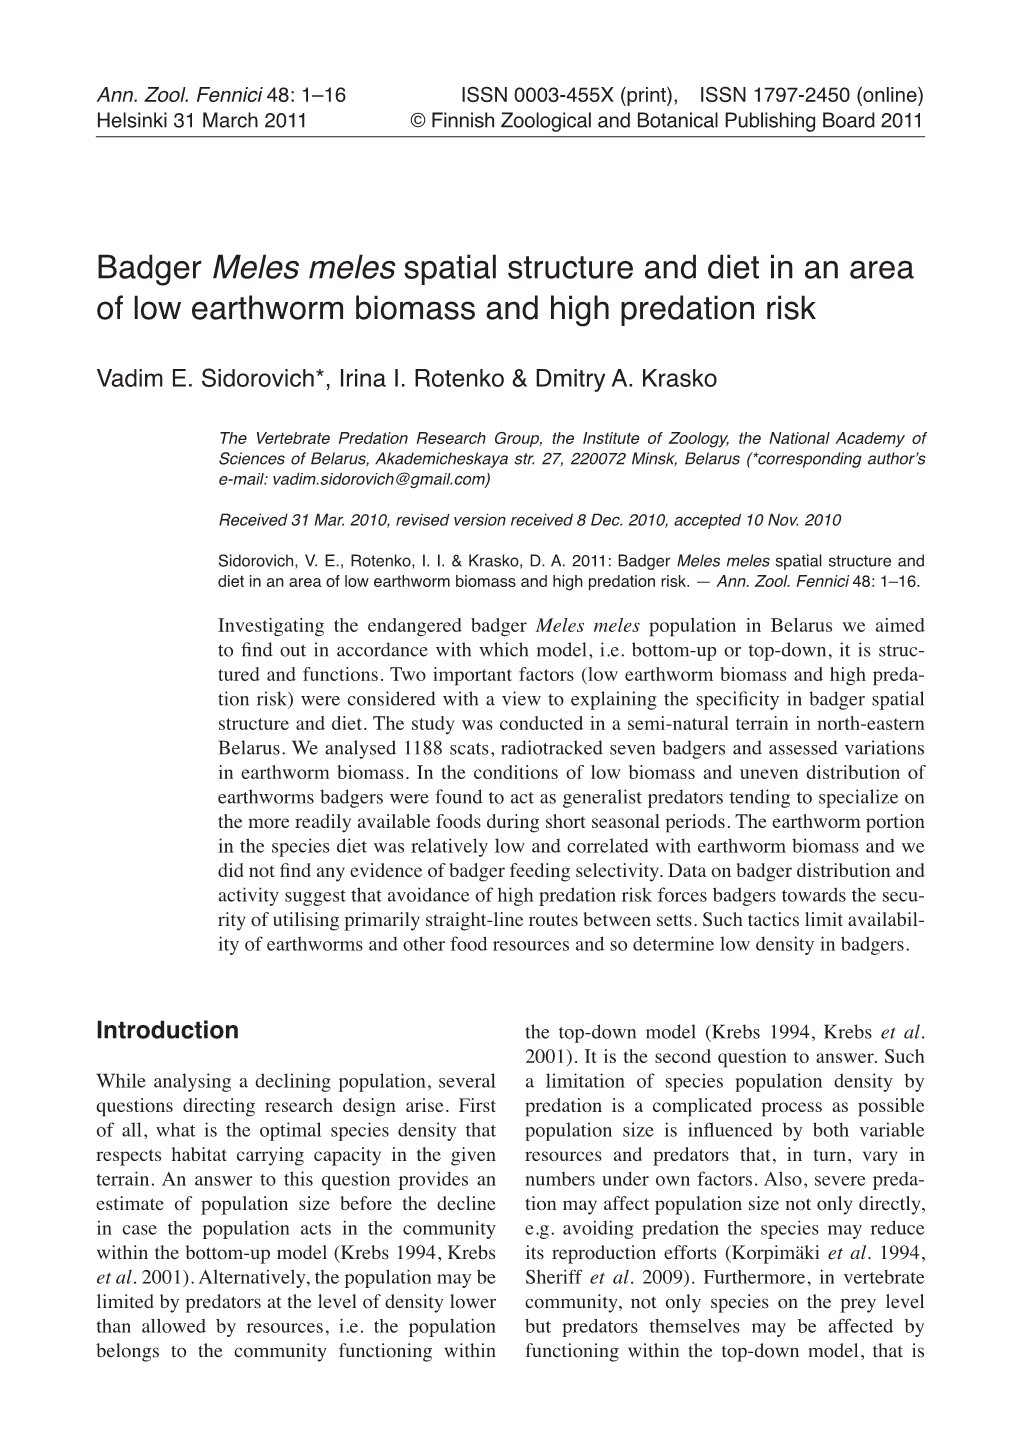 Badger Meles Meles Spatial Structure and Diet in an Area of Low Earthworm Biomass and High Predation Risk